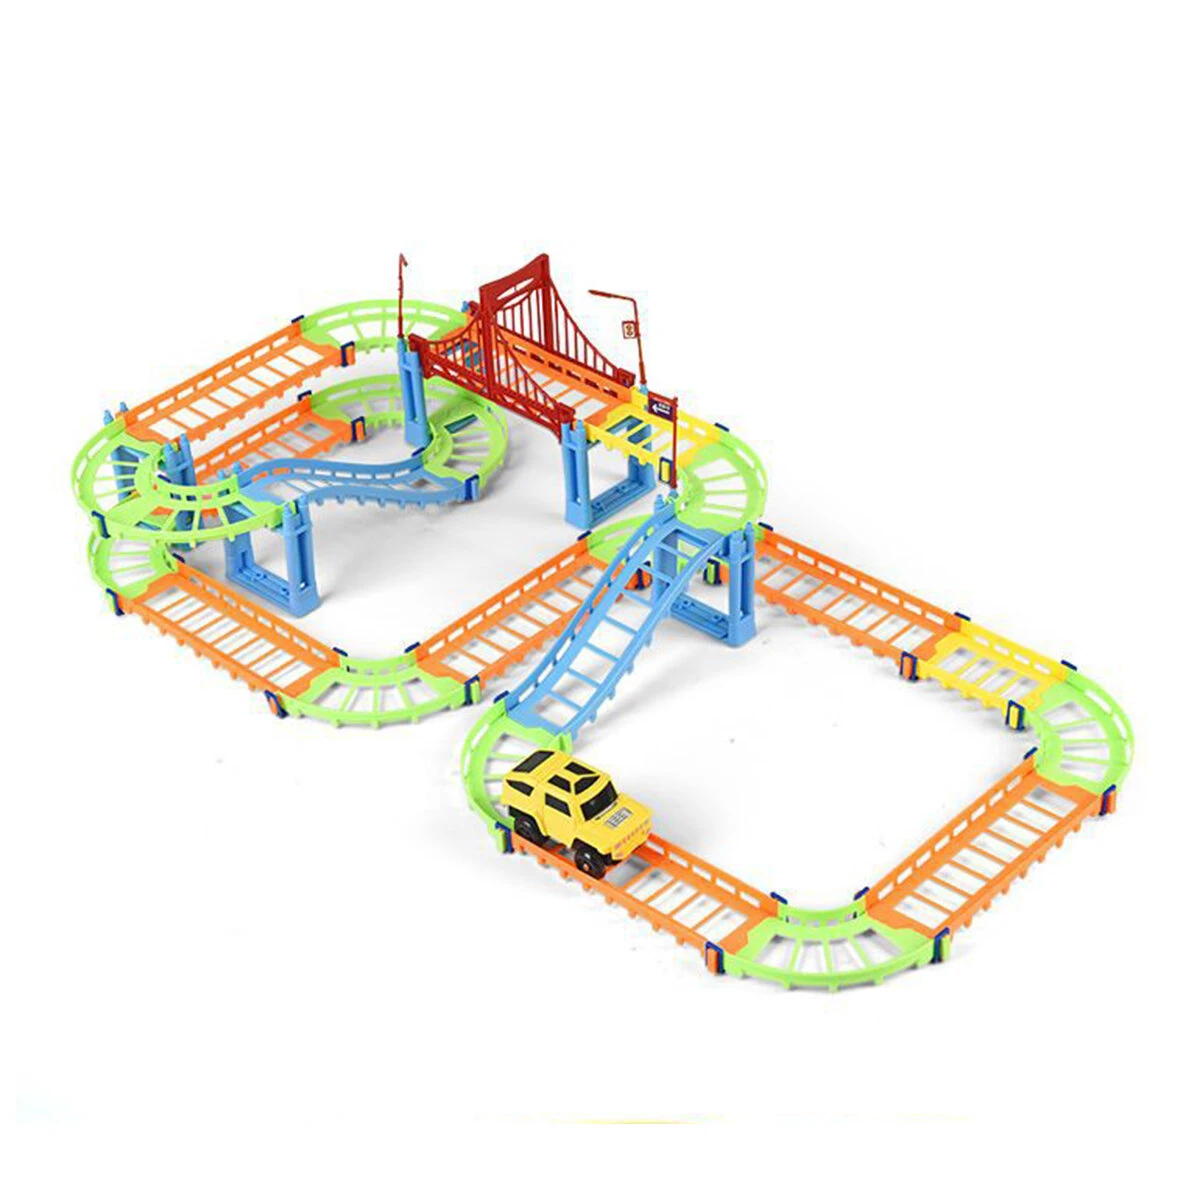 80/91/140pcs diy assembly electric abs track car model set puzzle educational toy for kids